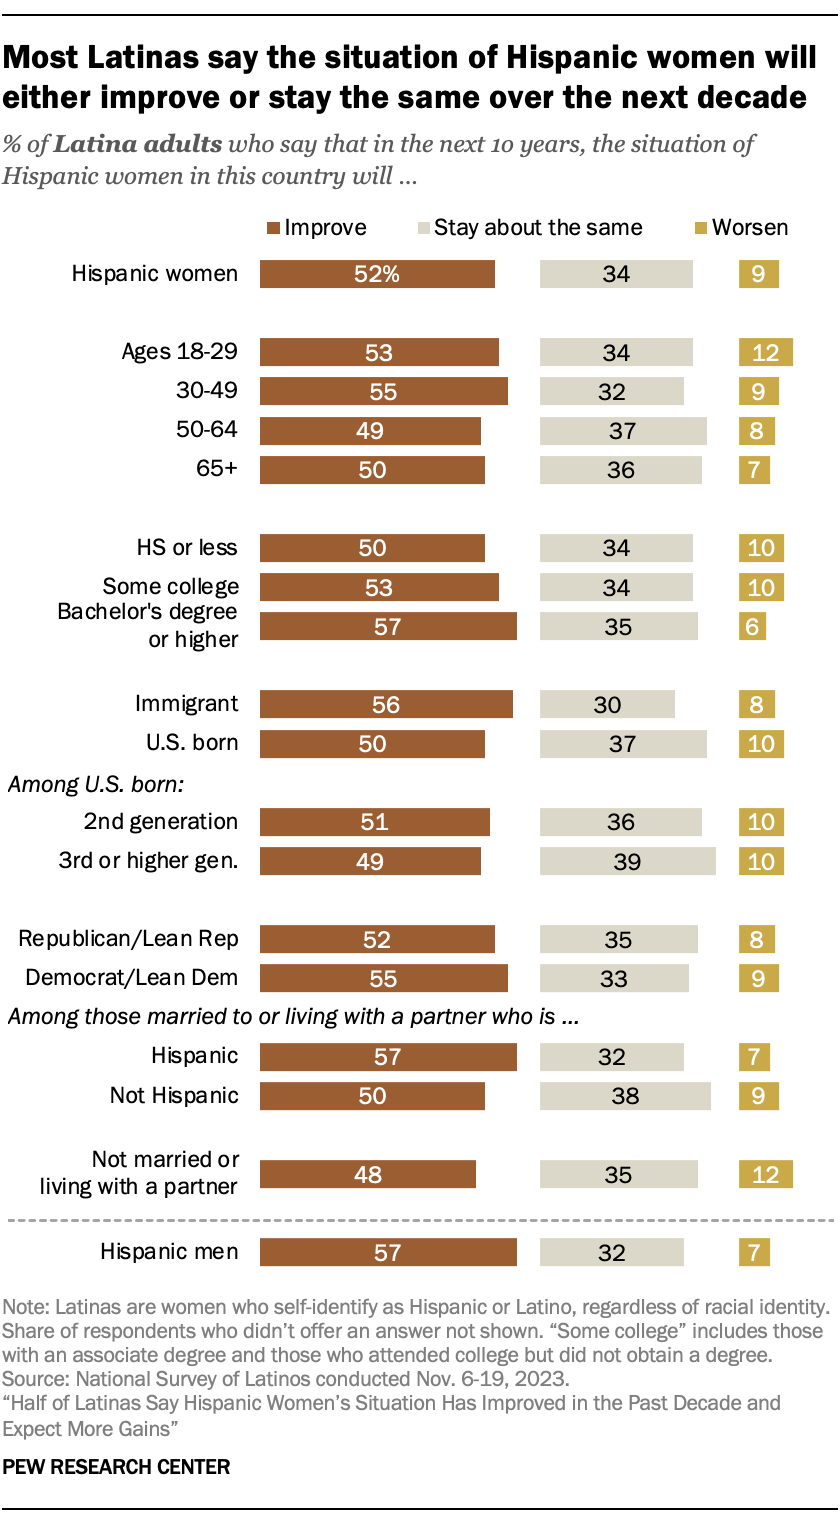 Bar charts showing most Latinas say the situation of Hispanic women will either improve or stay the same over the next decade. Latinas with a bachelor’s degree or who are immigrants are more likely to say that Hispanic women’s situation in the U.S. will improve in the next ten years.